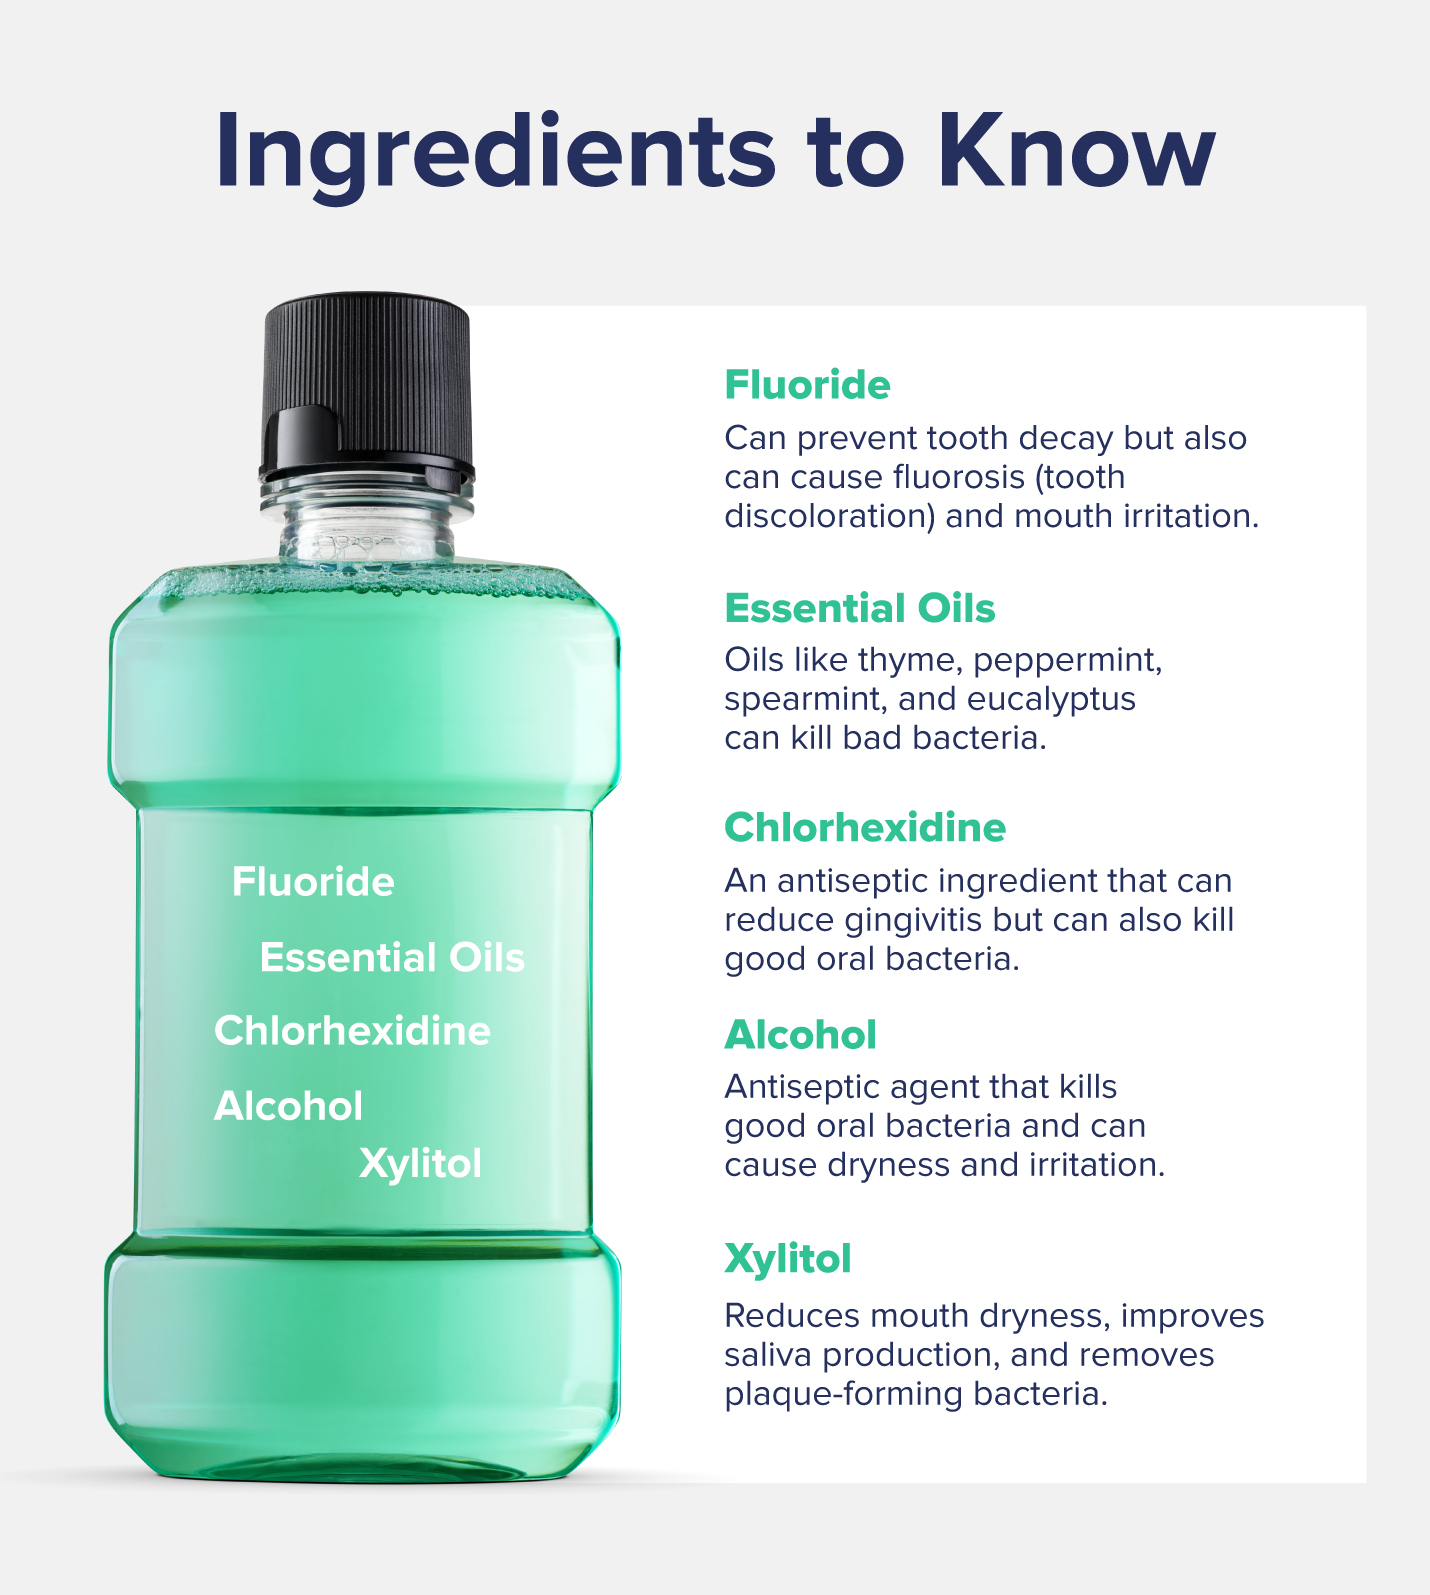 Ingredients to KnowFluoride - Can prevent tooth decay but also can cause fluorosis (tooth discoloration) and mouth irritation.Essential Oils - Oils like thyme, peppermint, spearmint, and eucalyptus can kill bas bacteria. Chlorhexidine - an antiseptic ingredient that can reduce gingivitis but can also kill good oral bacteria. Alcohol - Antiseptic agent that kills good oral bacteria and can cause dryness and irritation.Xylitol - reduces mouth dryness, improves saliva production, and removes plaque-forming bacteria.